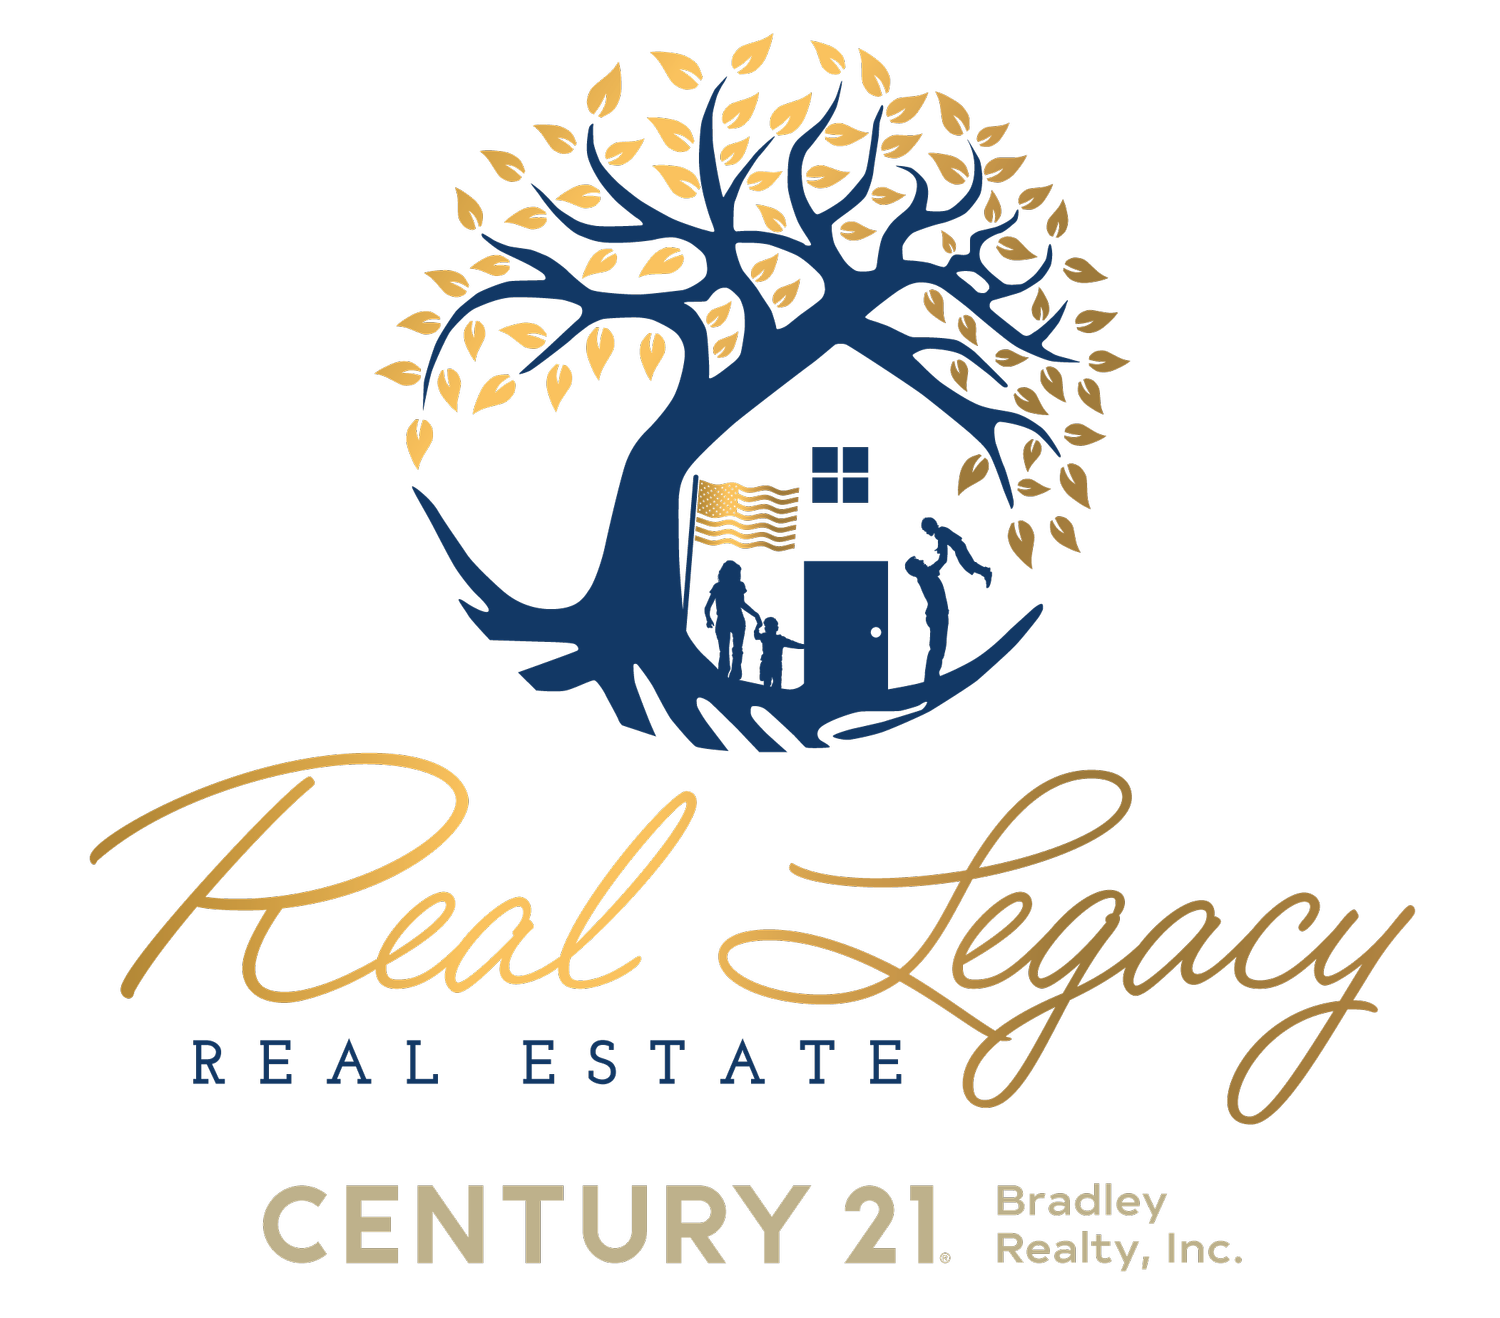 Real Legacy Real Estate